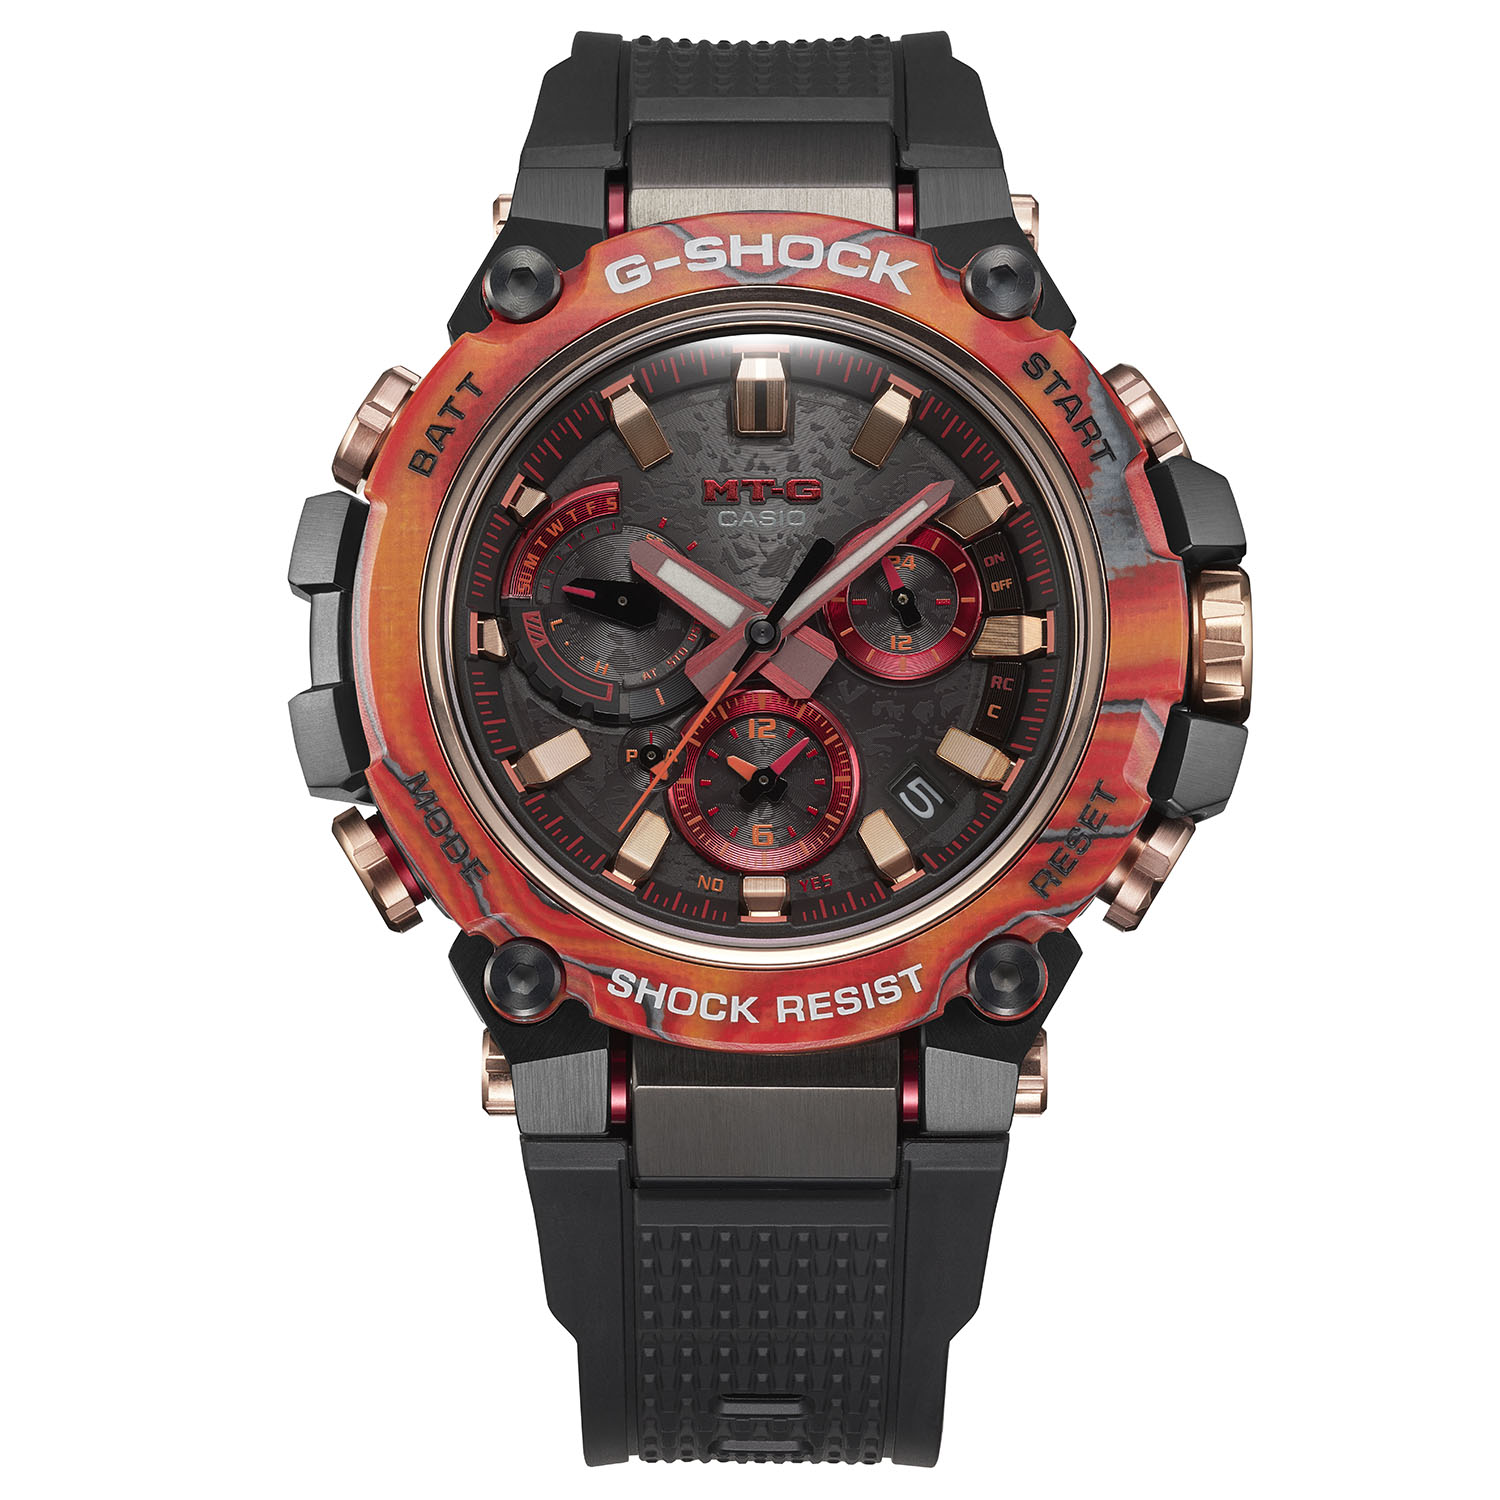 G-SHOCK 40th Anniversary – Flare Red and Eric Haze Collaboration Watch